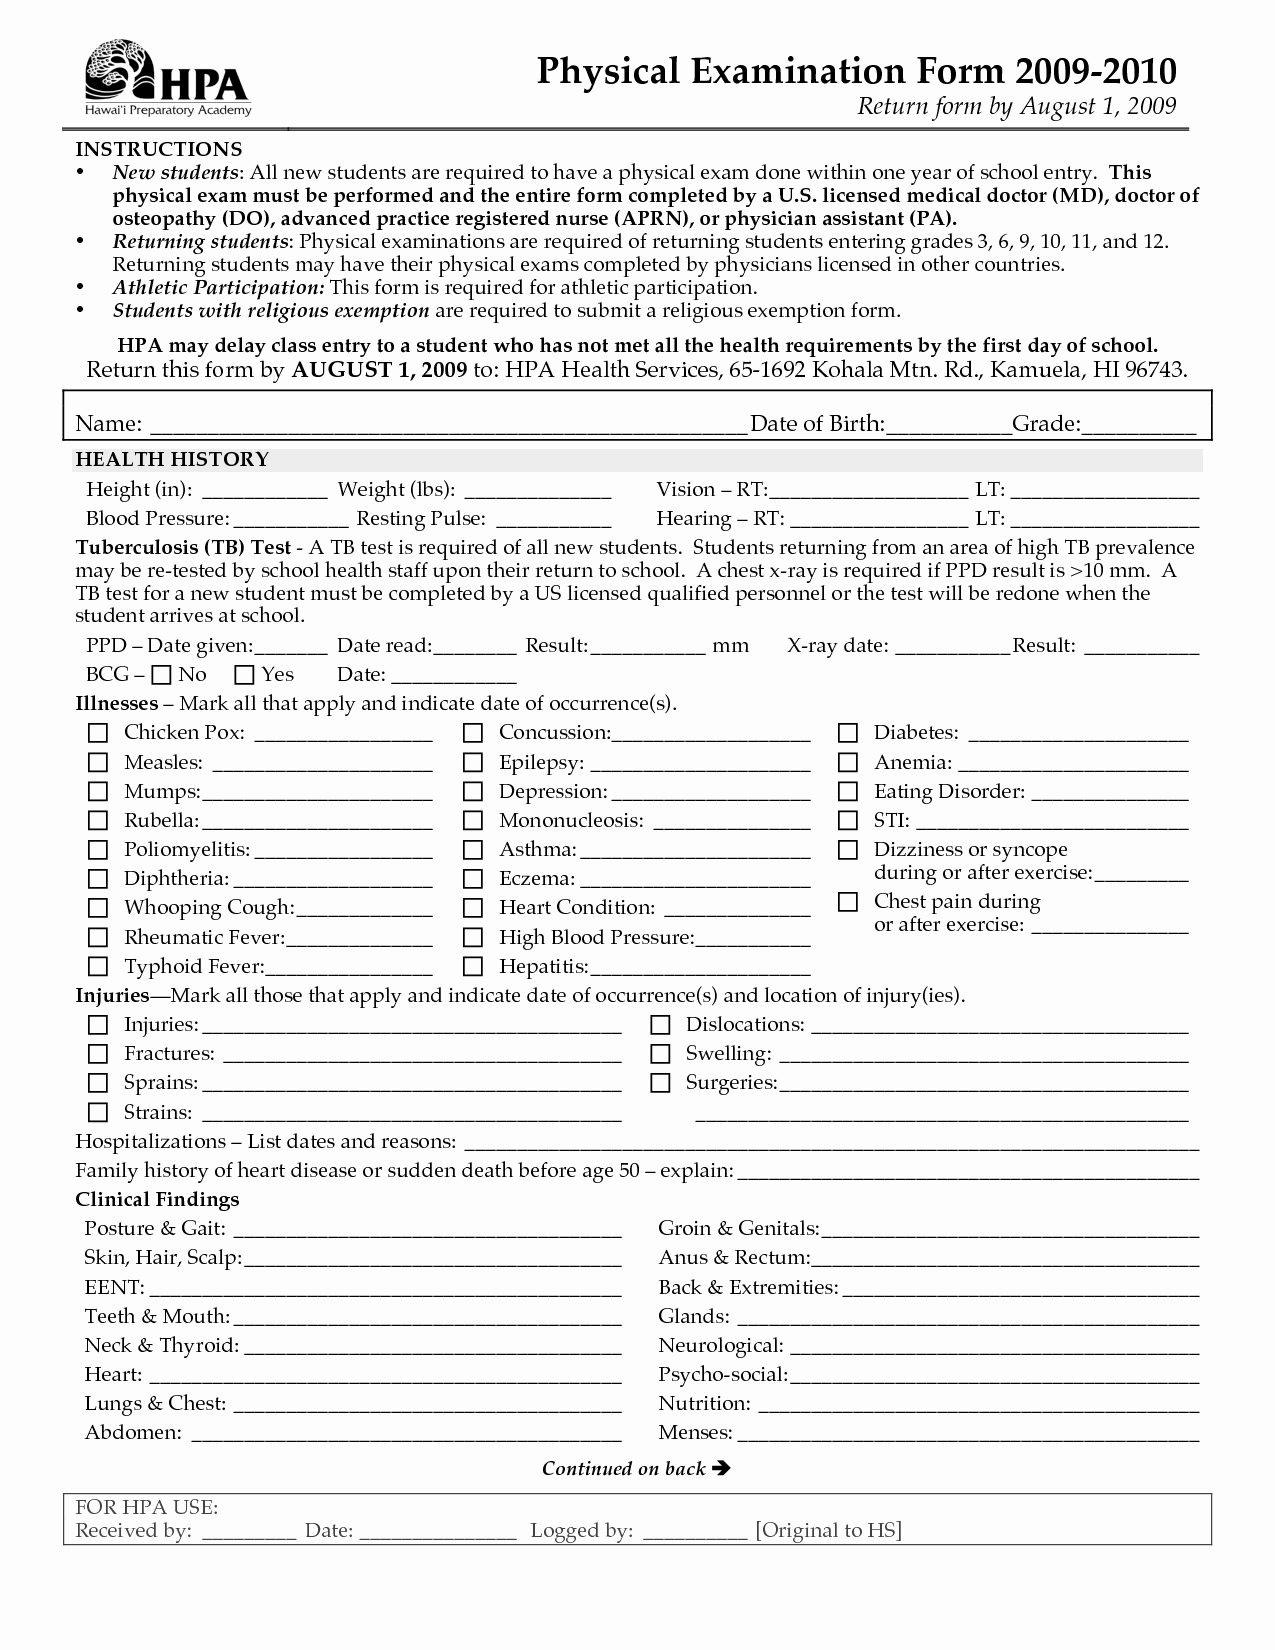 Physical Examination form Template Awesome Veterinary Exam forms to Pin On Pinterest Pinsdaddy